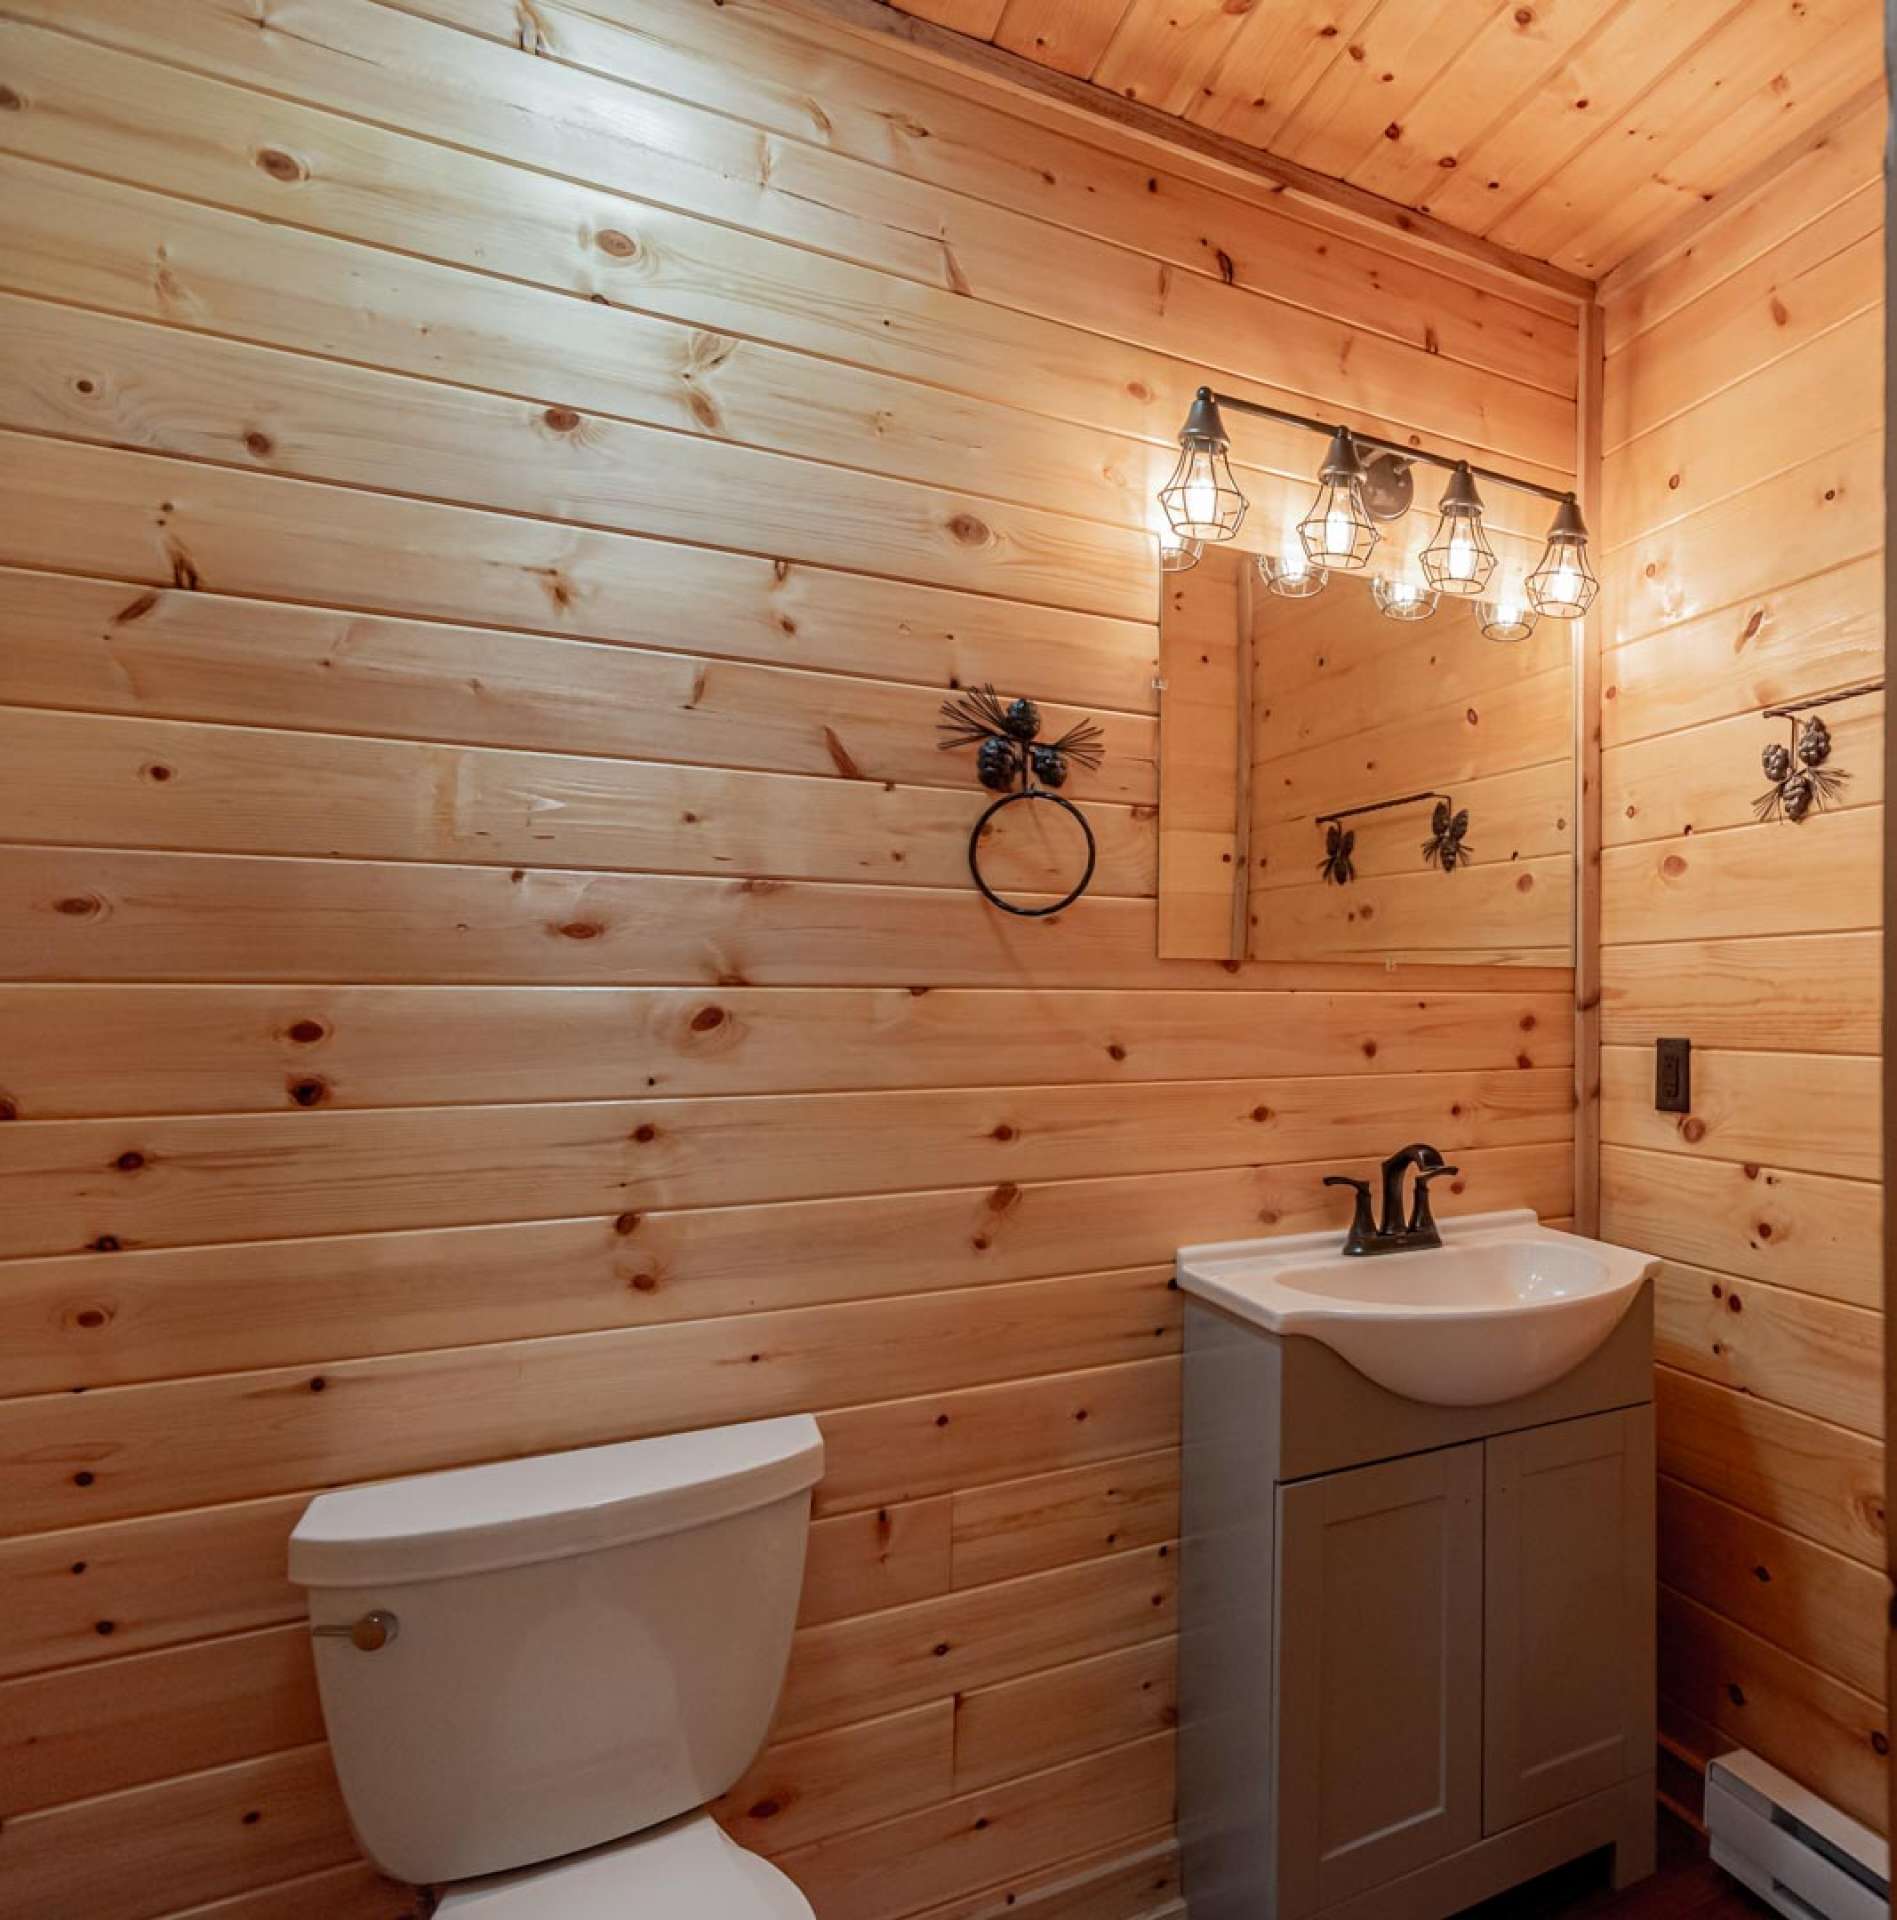 The guest cabin features a a full bath with tiled shower.